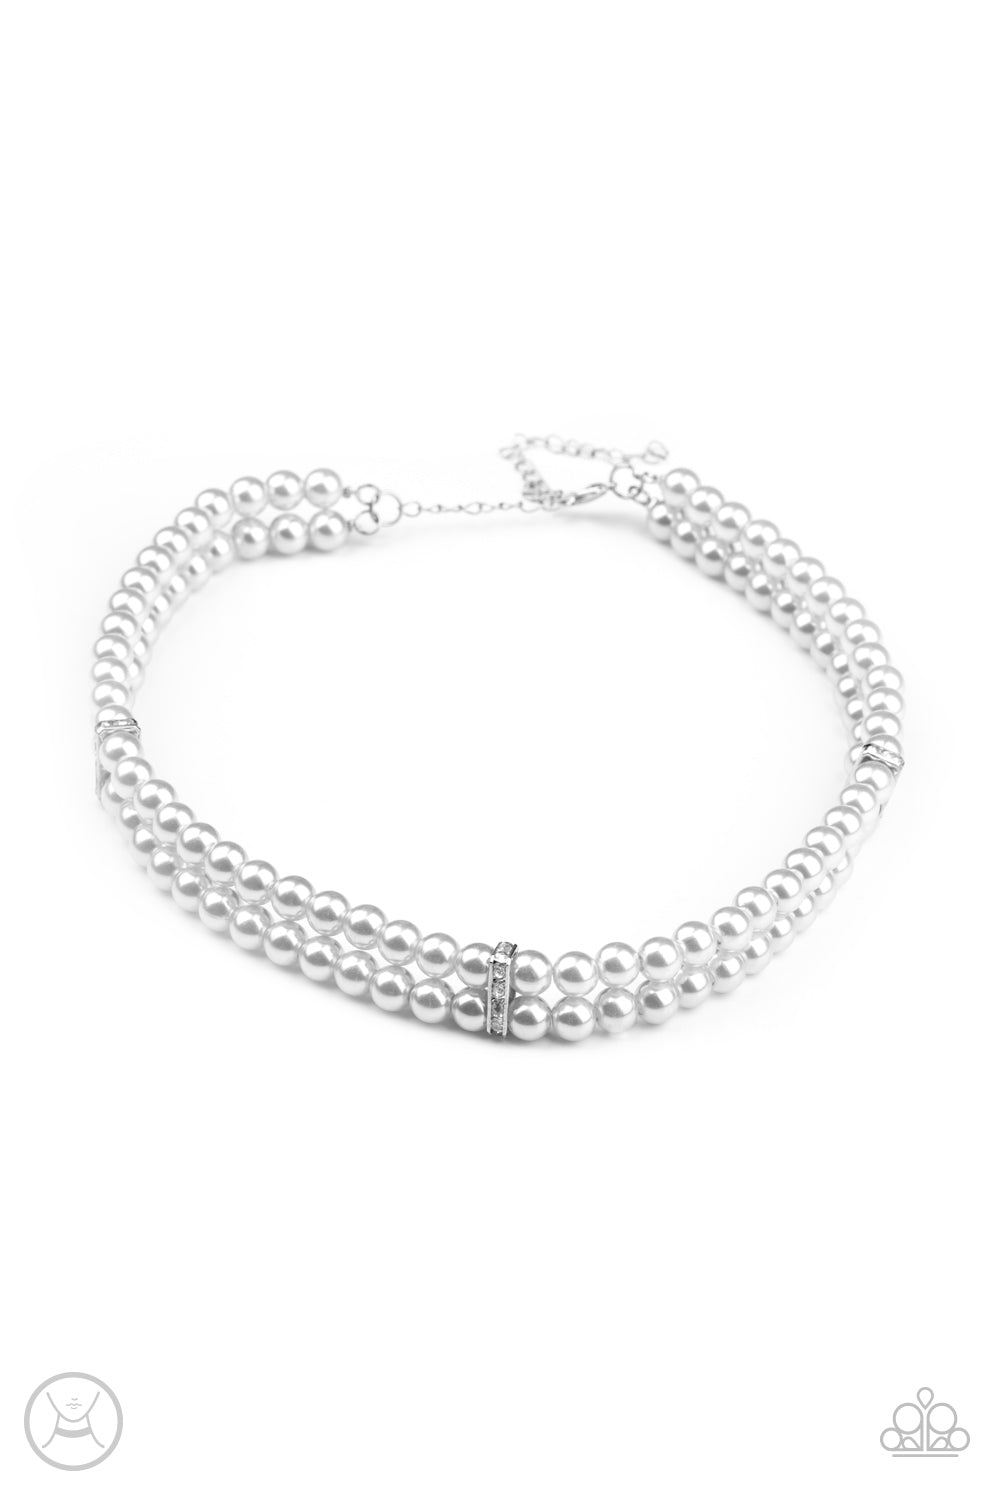 Put On Your Party Dress Necklace - Silver